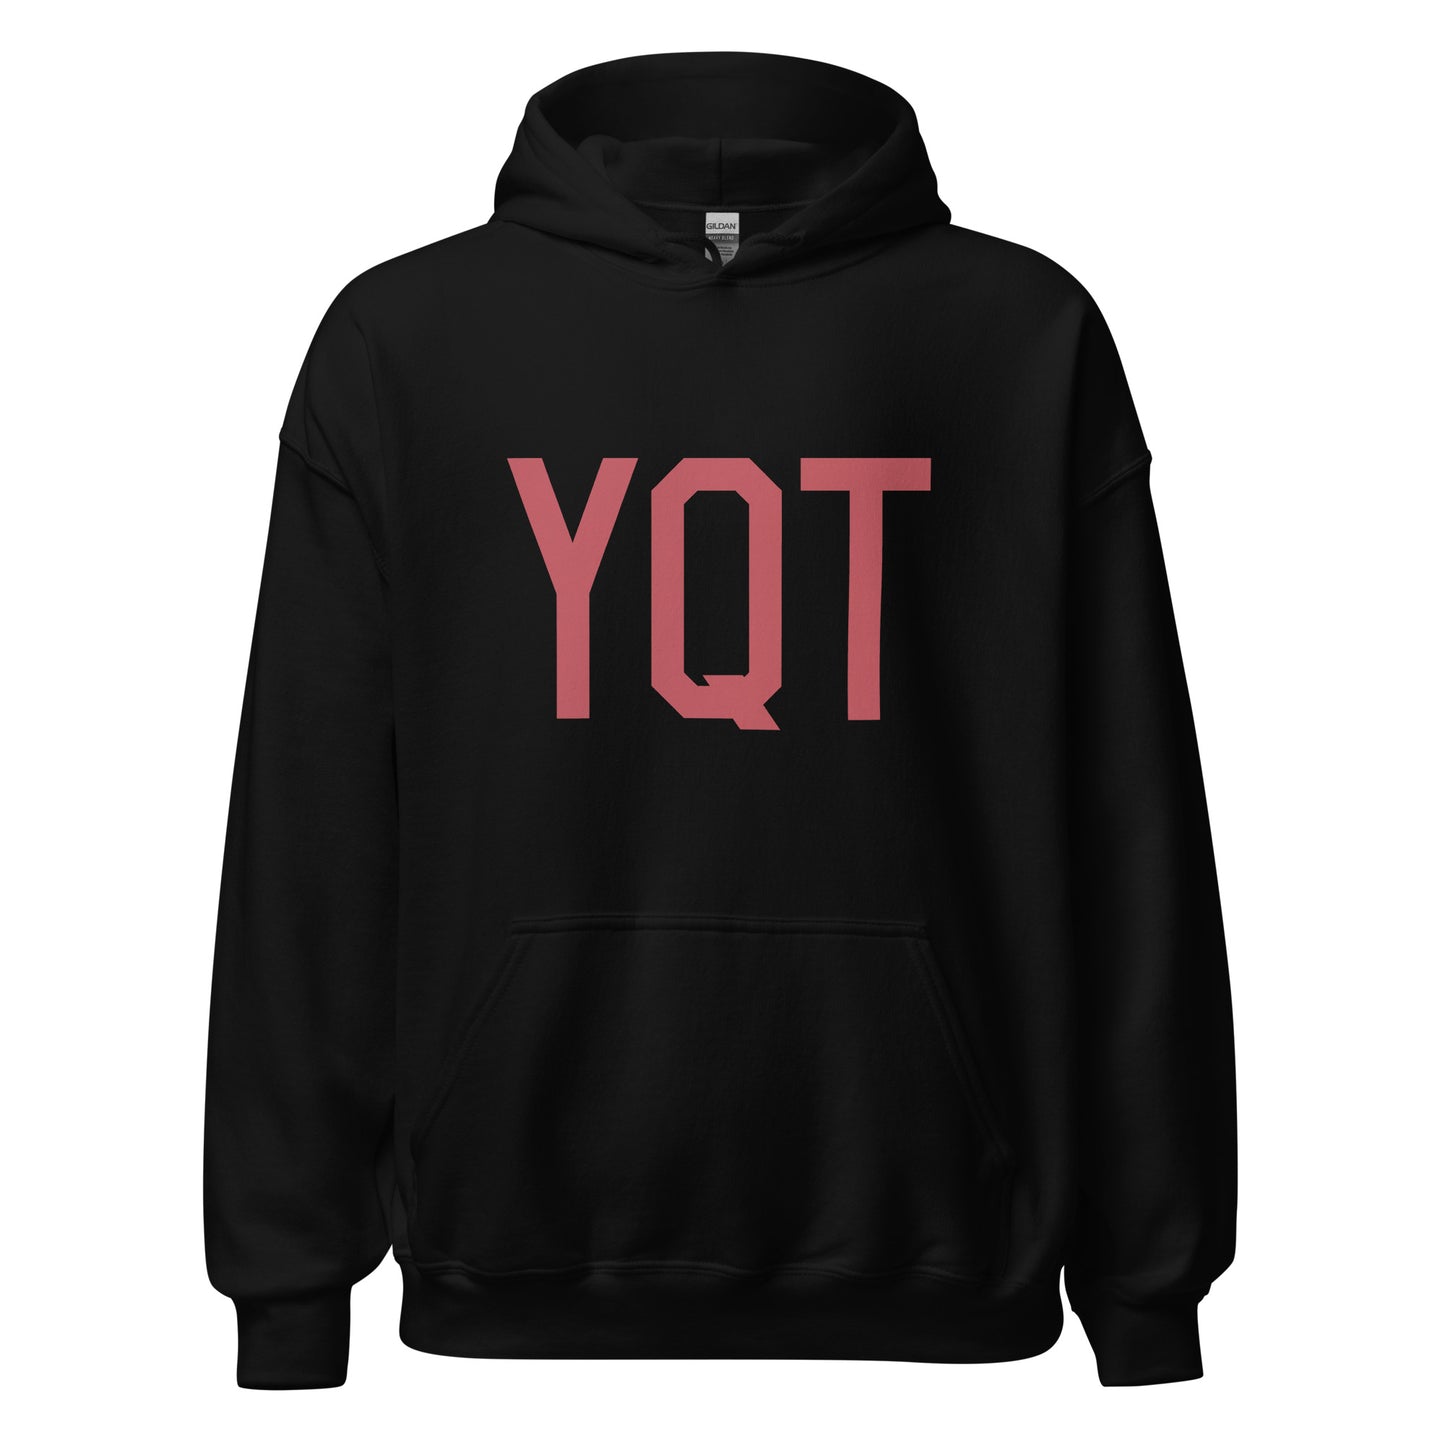 Aviation Enthusiast Hoodie - Deep Pink Graphic • YQT Thunder Bay • YHM Designs - Image 03